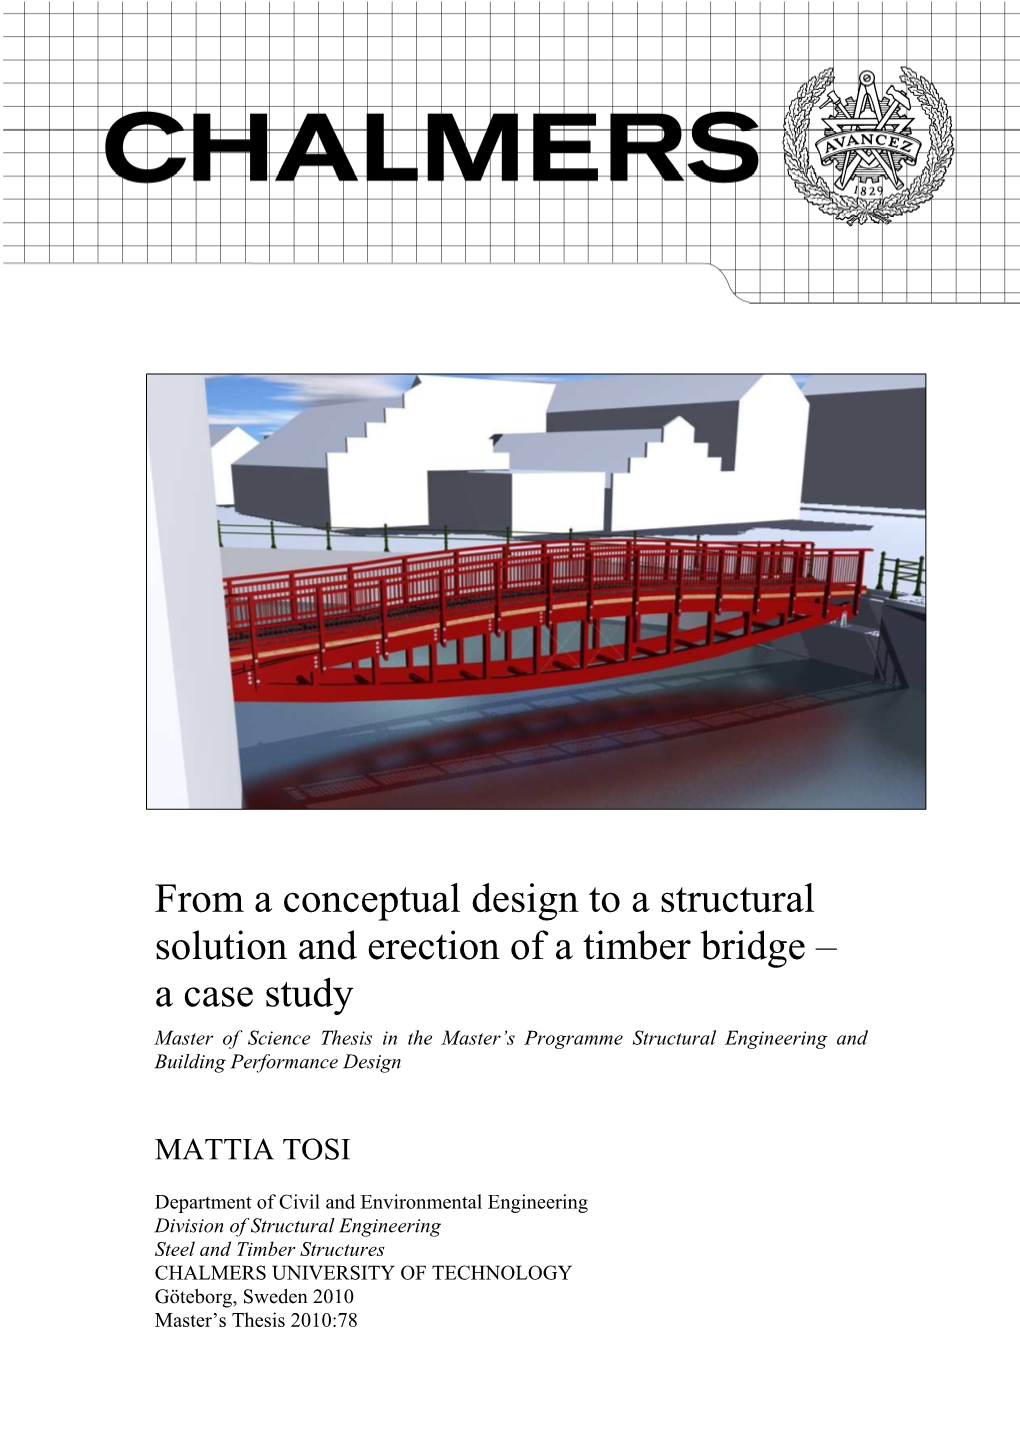 From a Conceptual Design to a Structural Solution and Erection of A